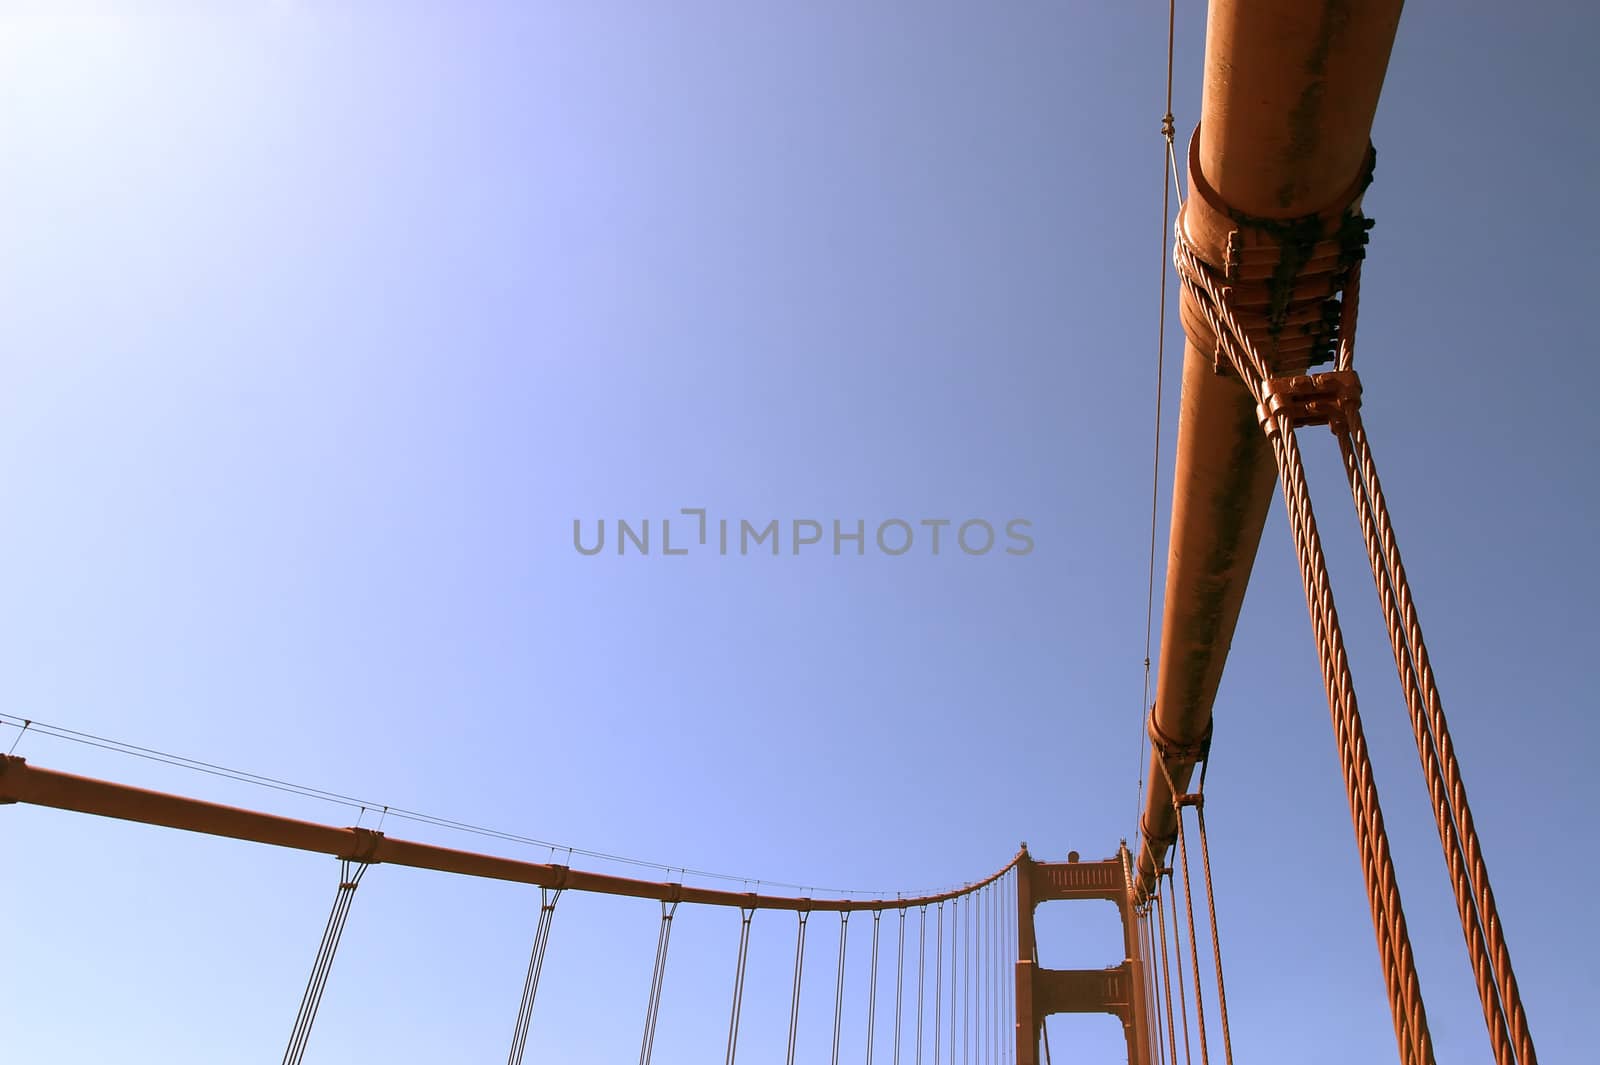 A shot of the supporting cables of the Golden Gate Bridge.